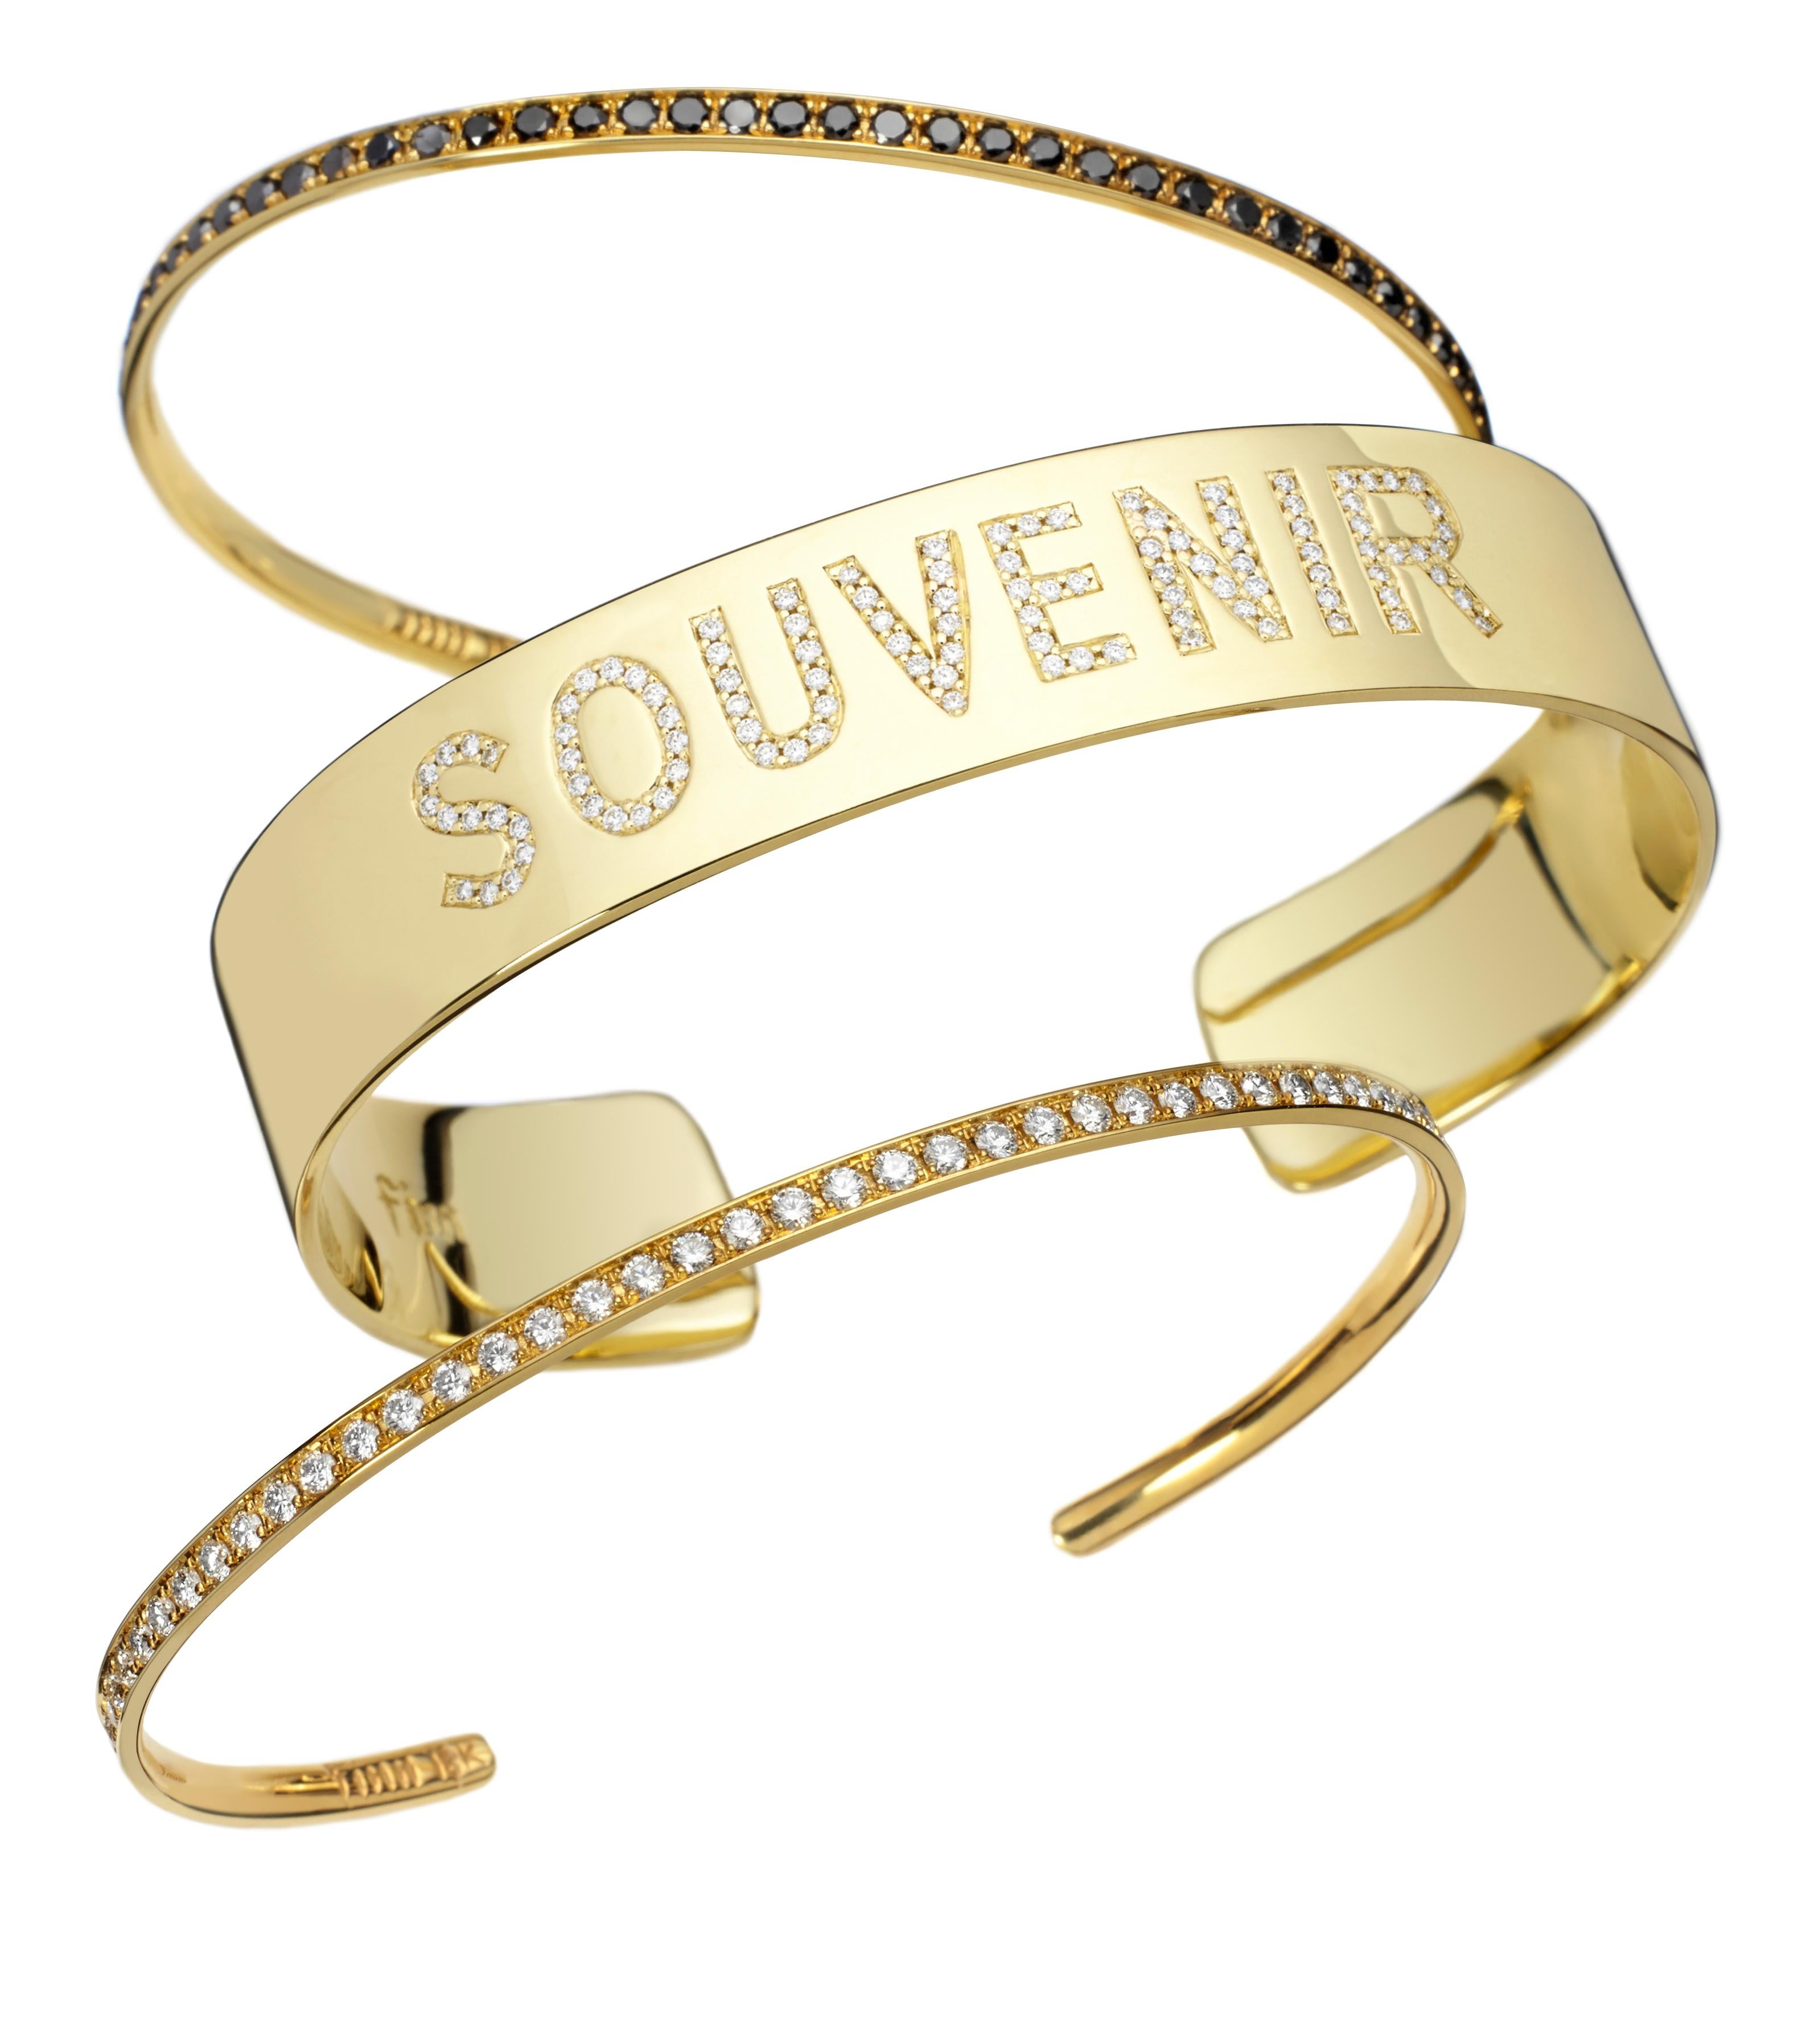 This solid 18k gold cuff bracelet was hand set with white diamonds (.45 ct) spelling the word 